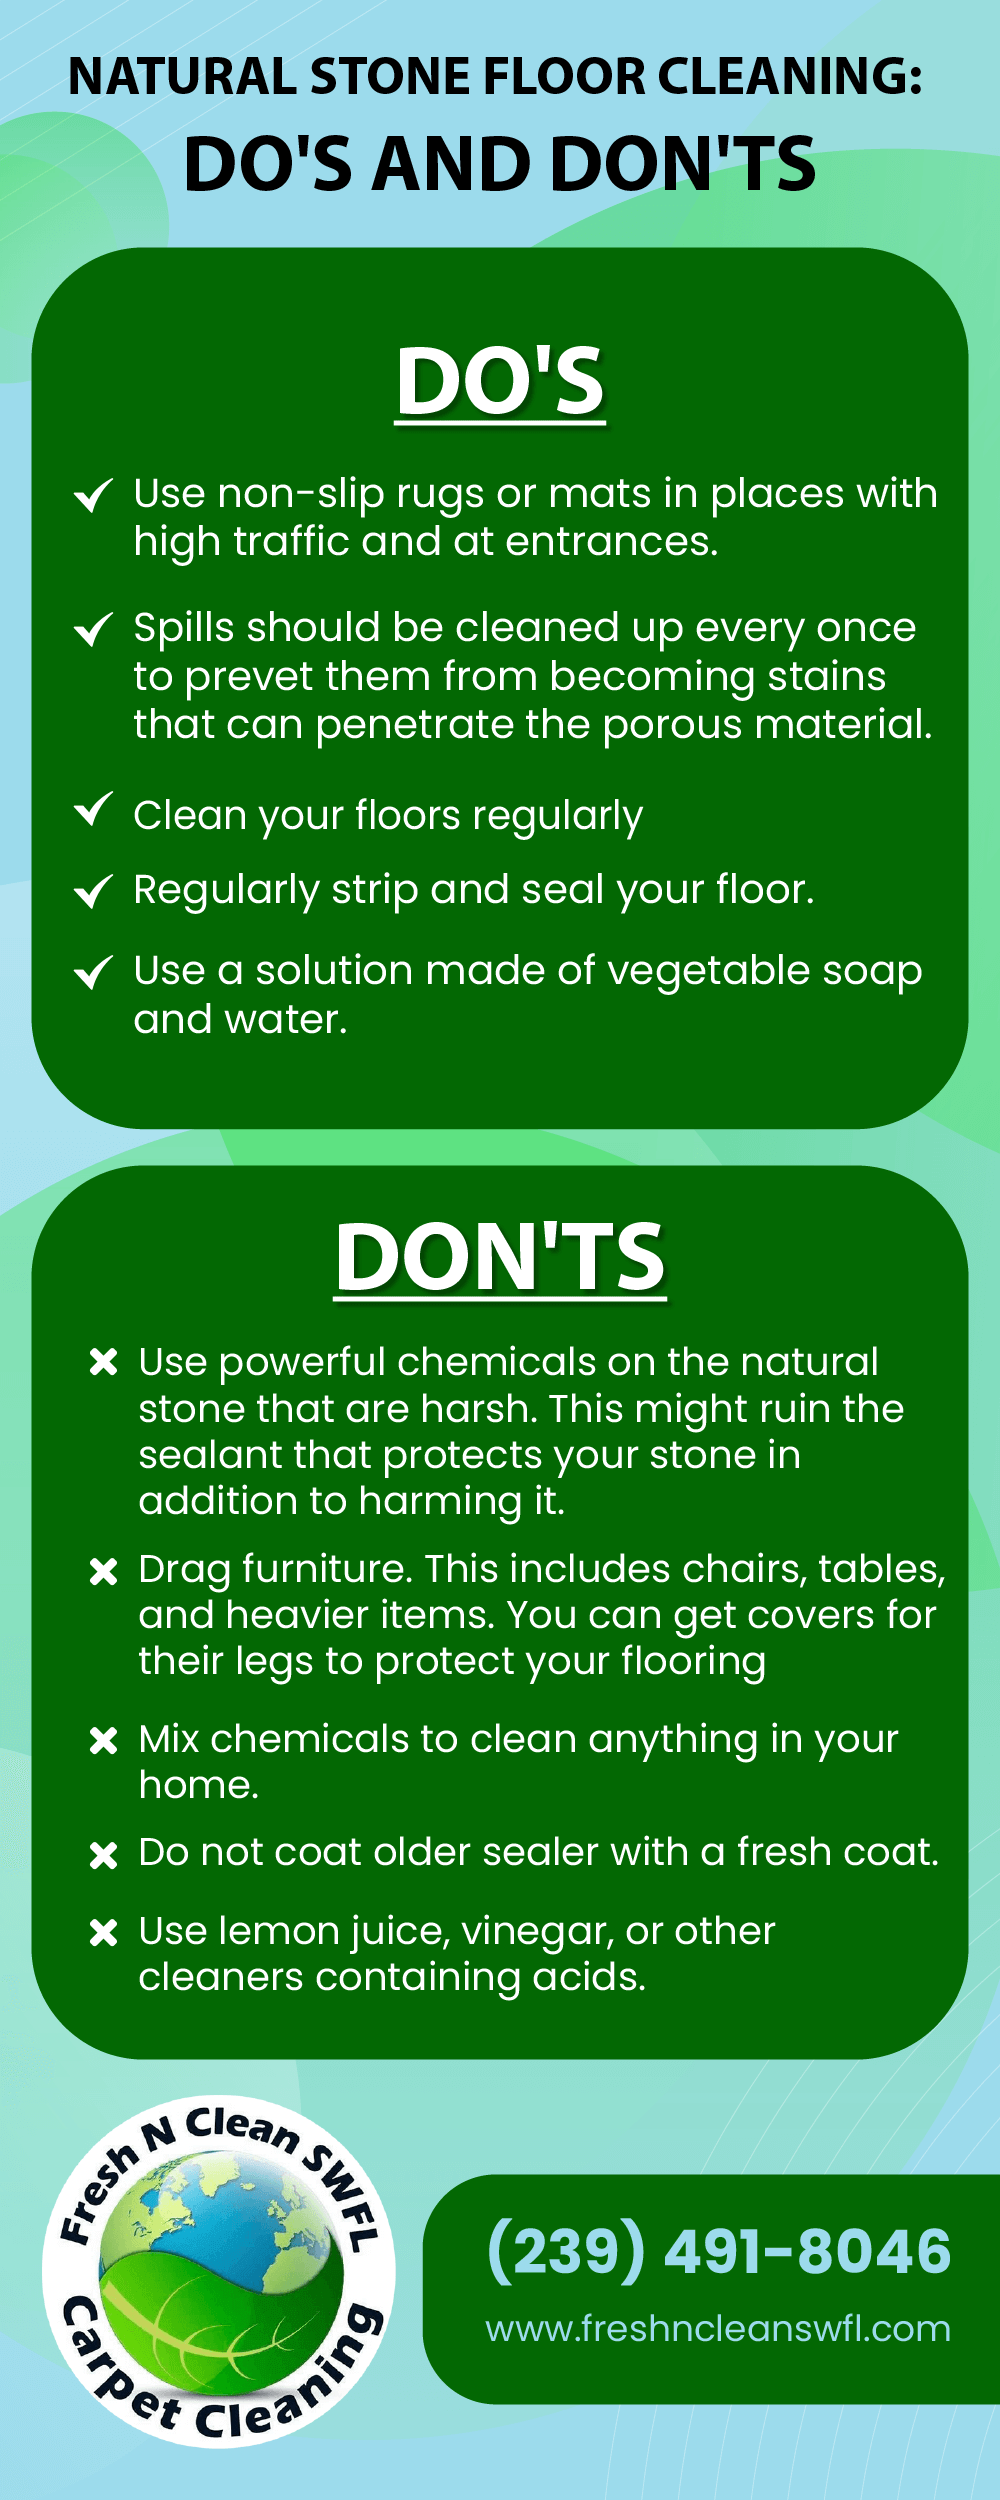 Natural Stone Floor Cleaning_ Do's and Don'ts